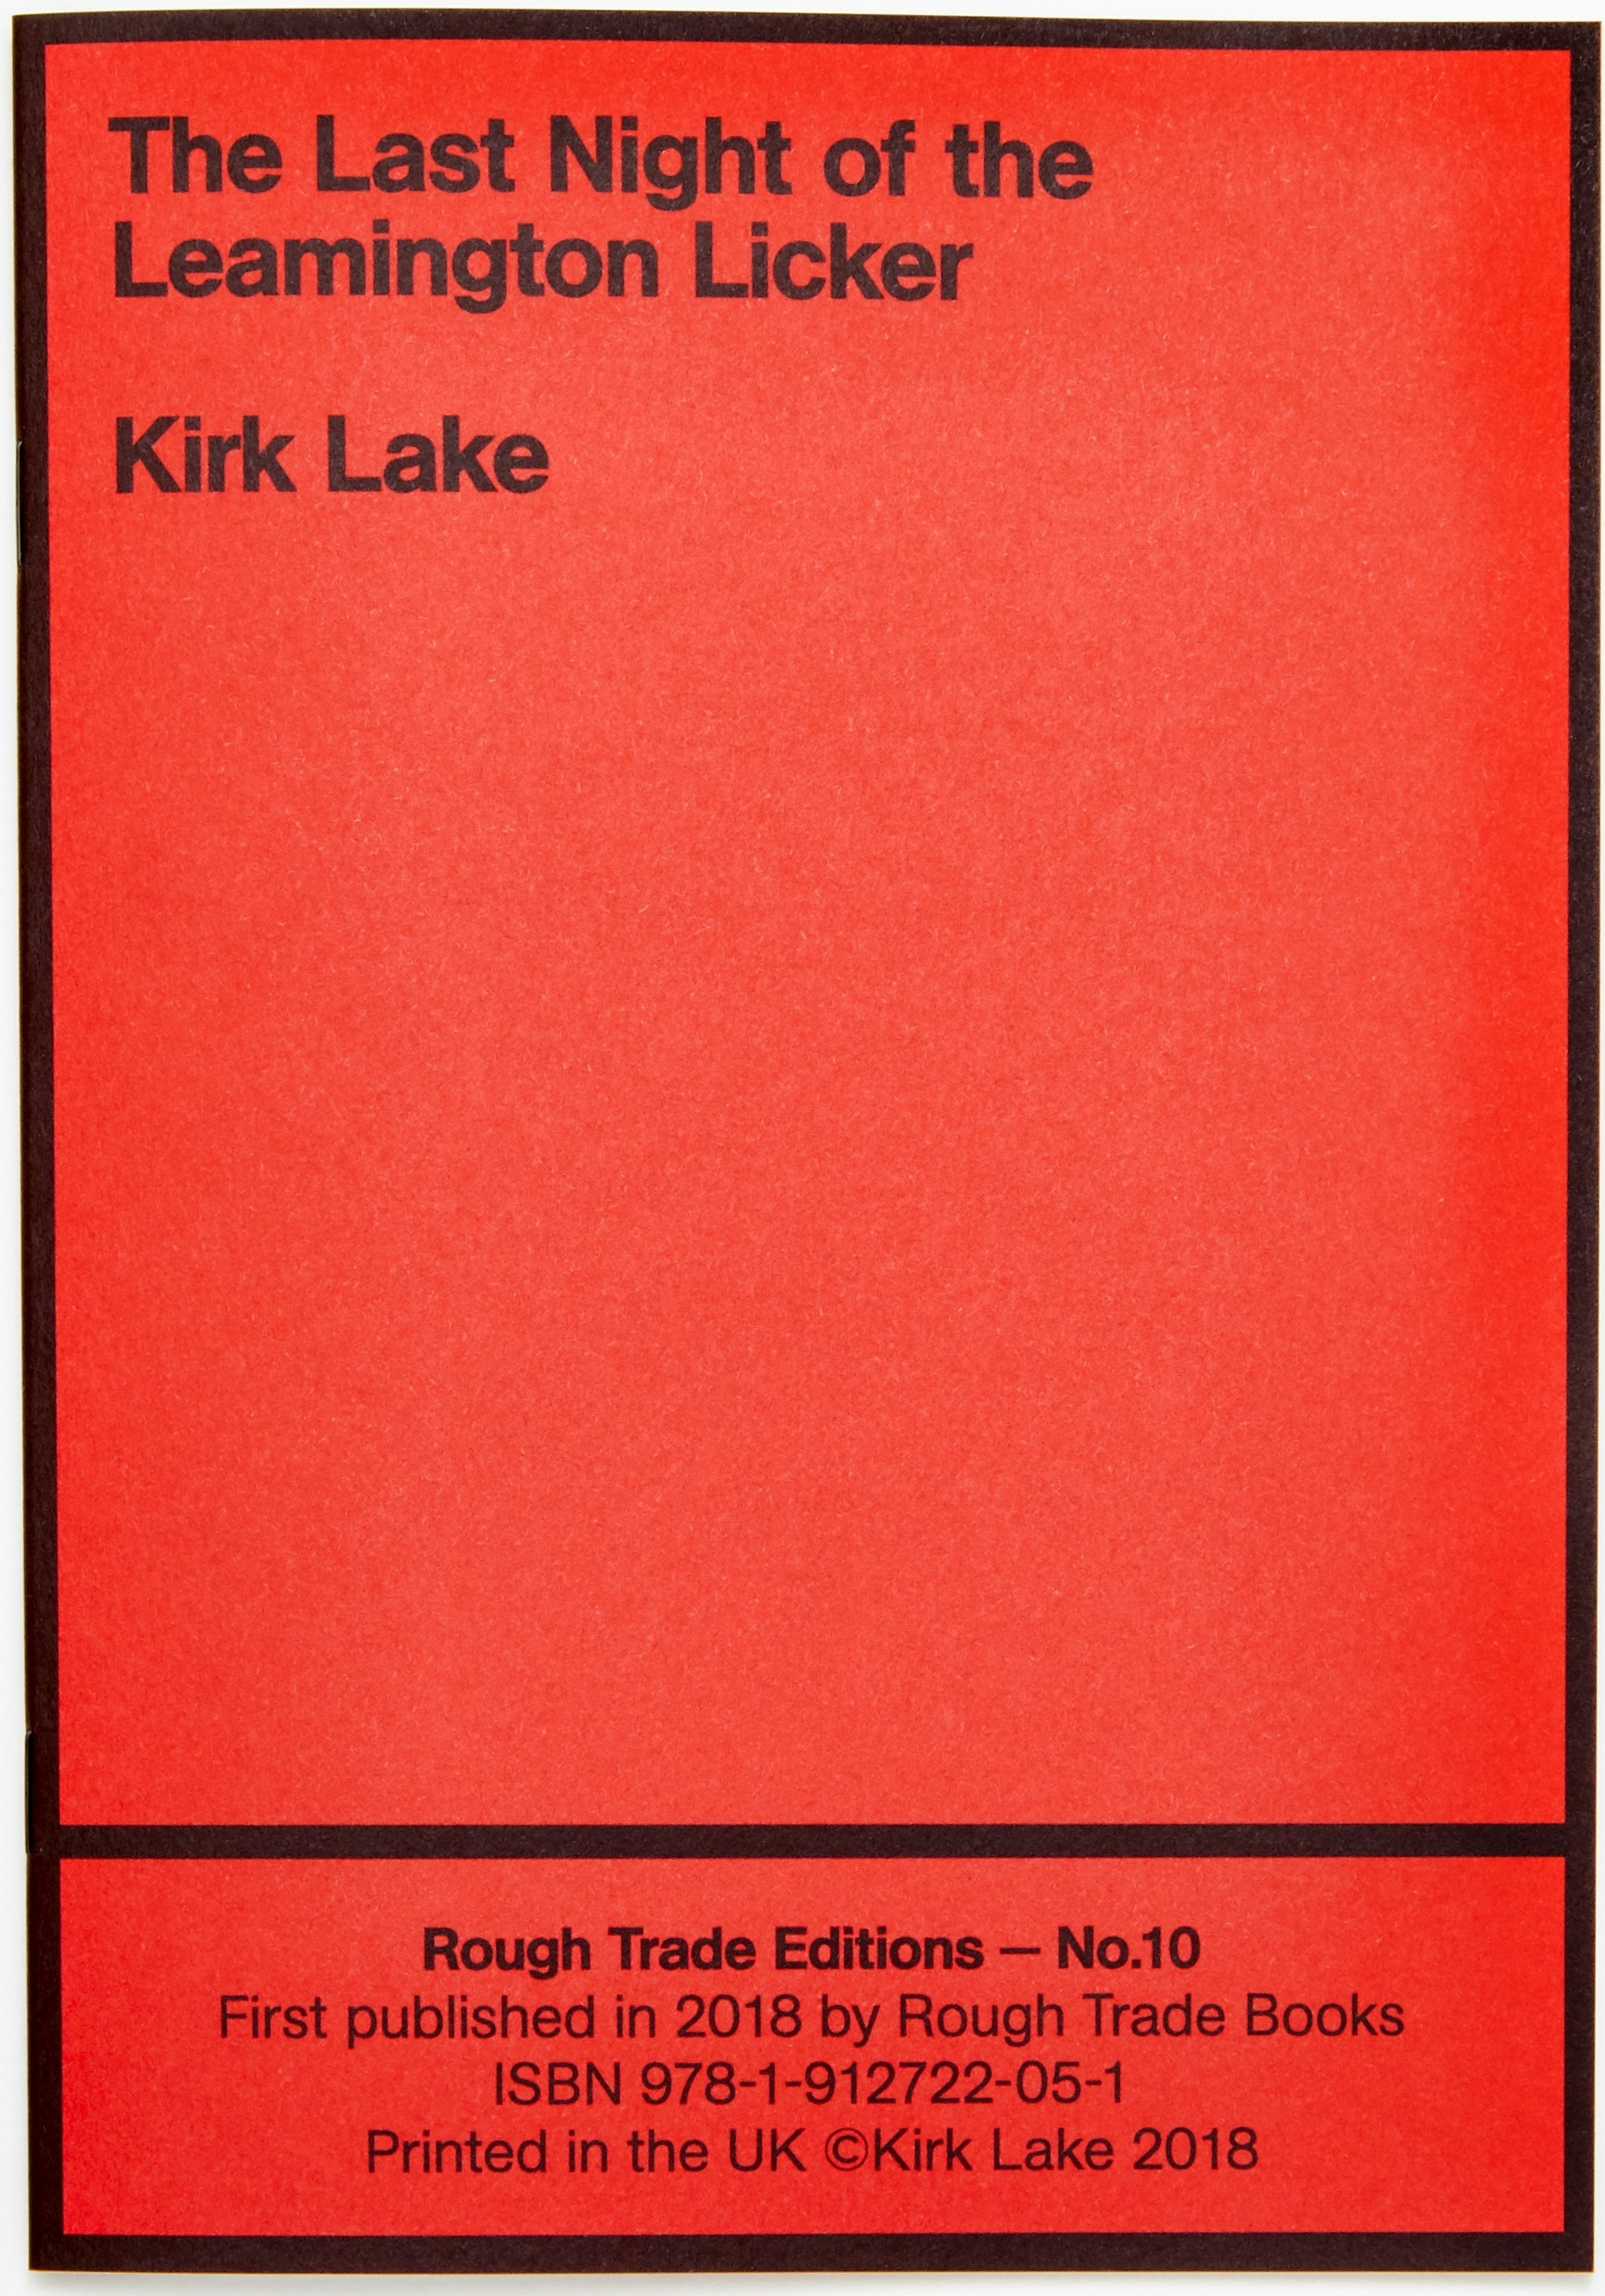 Album artwork for Album artwork for The Last Night of the Leamington Licker by Kirk Lake by The Last Night of the Leamington Licker - Kirk Lake